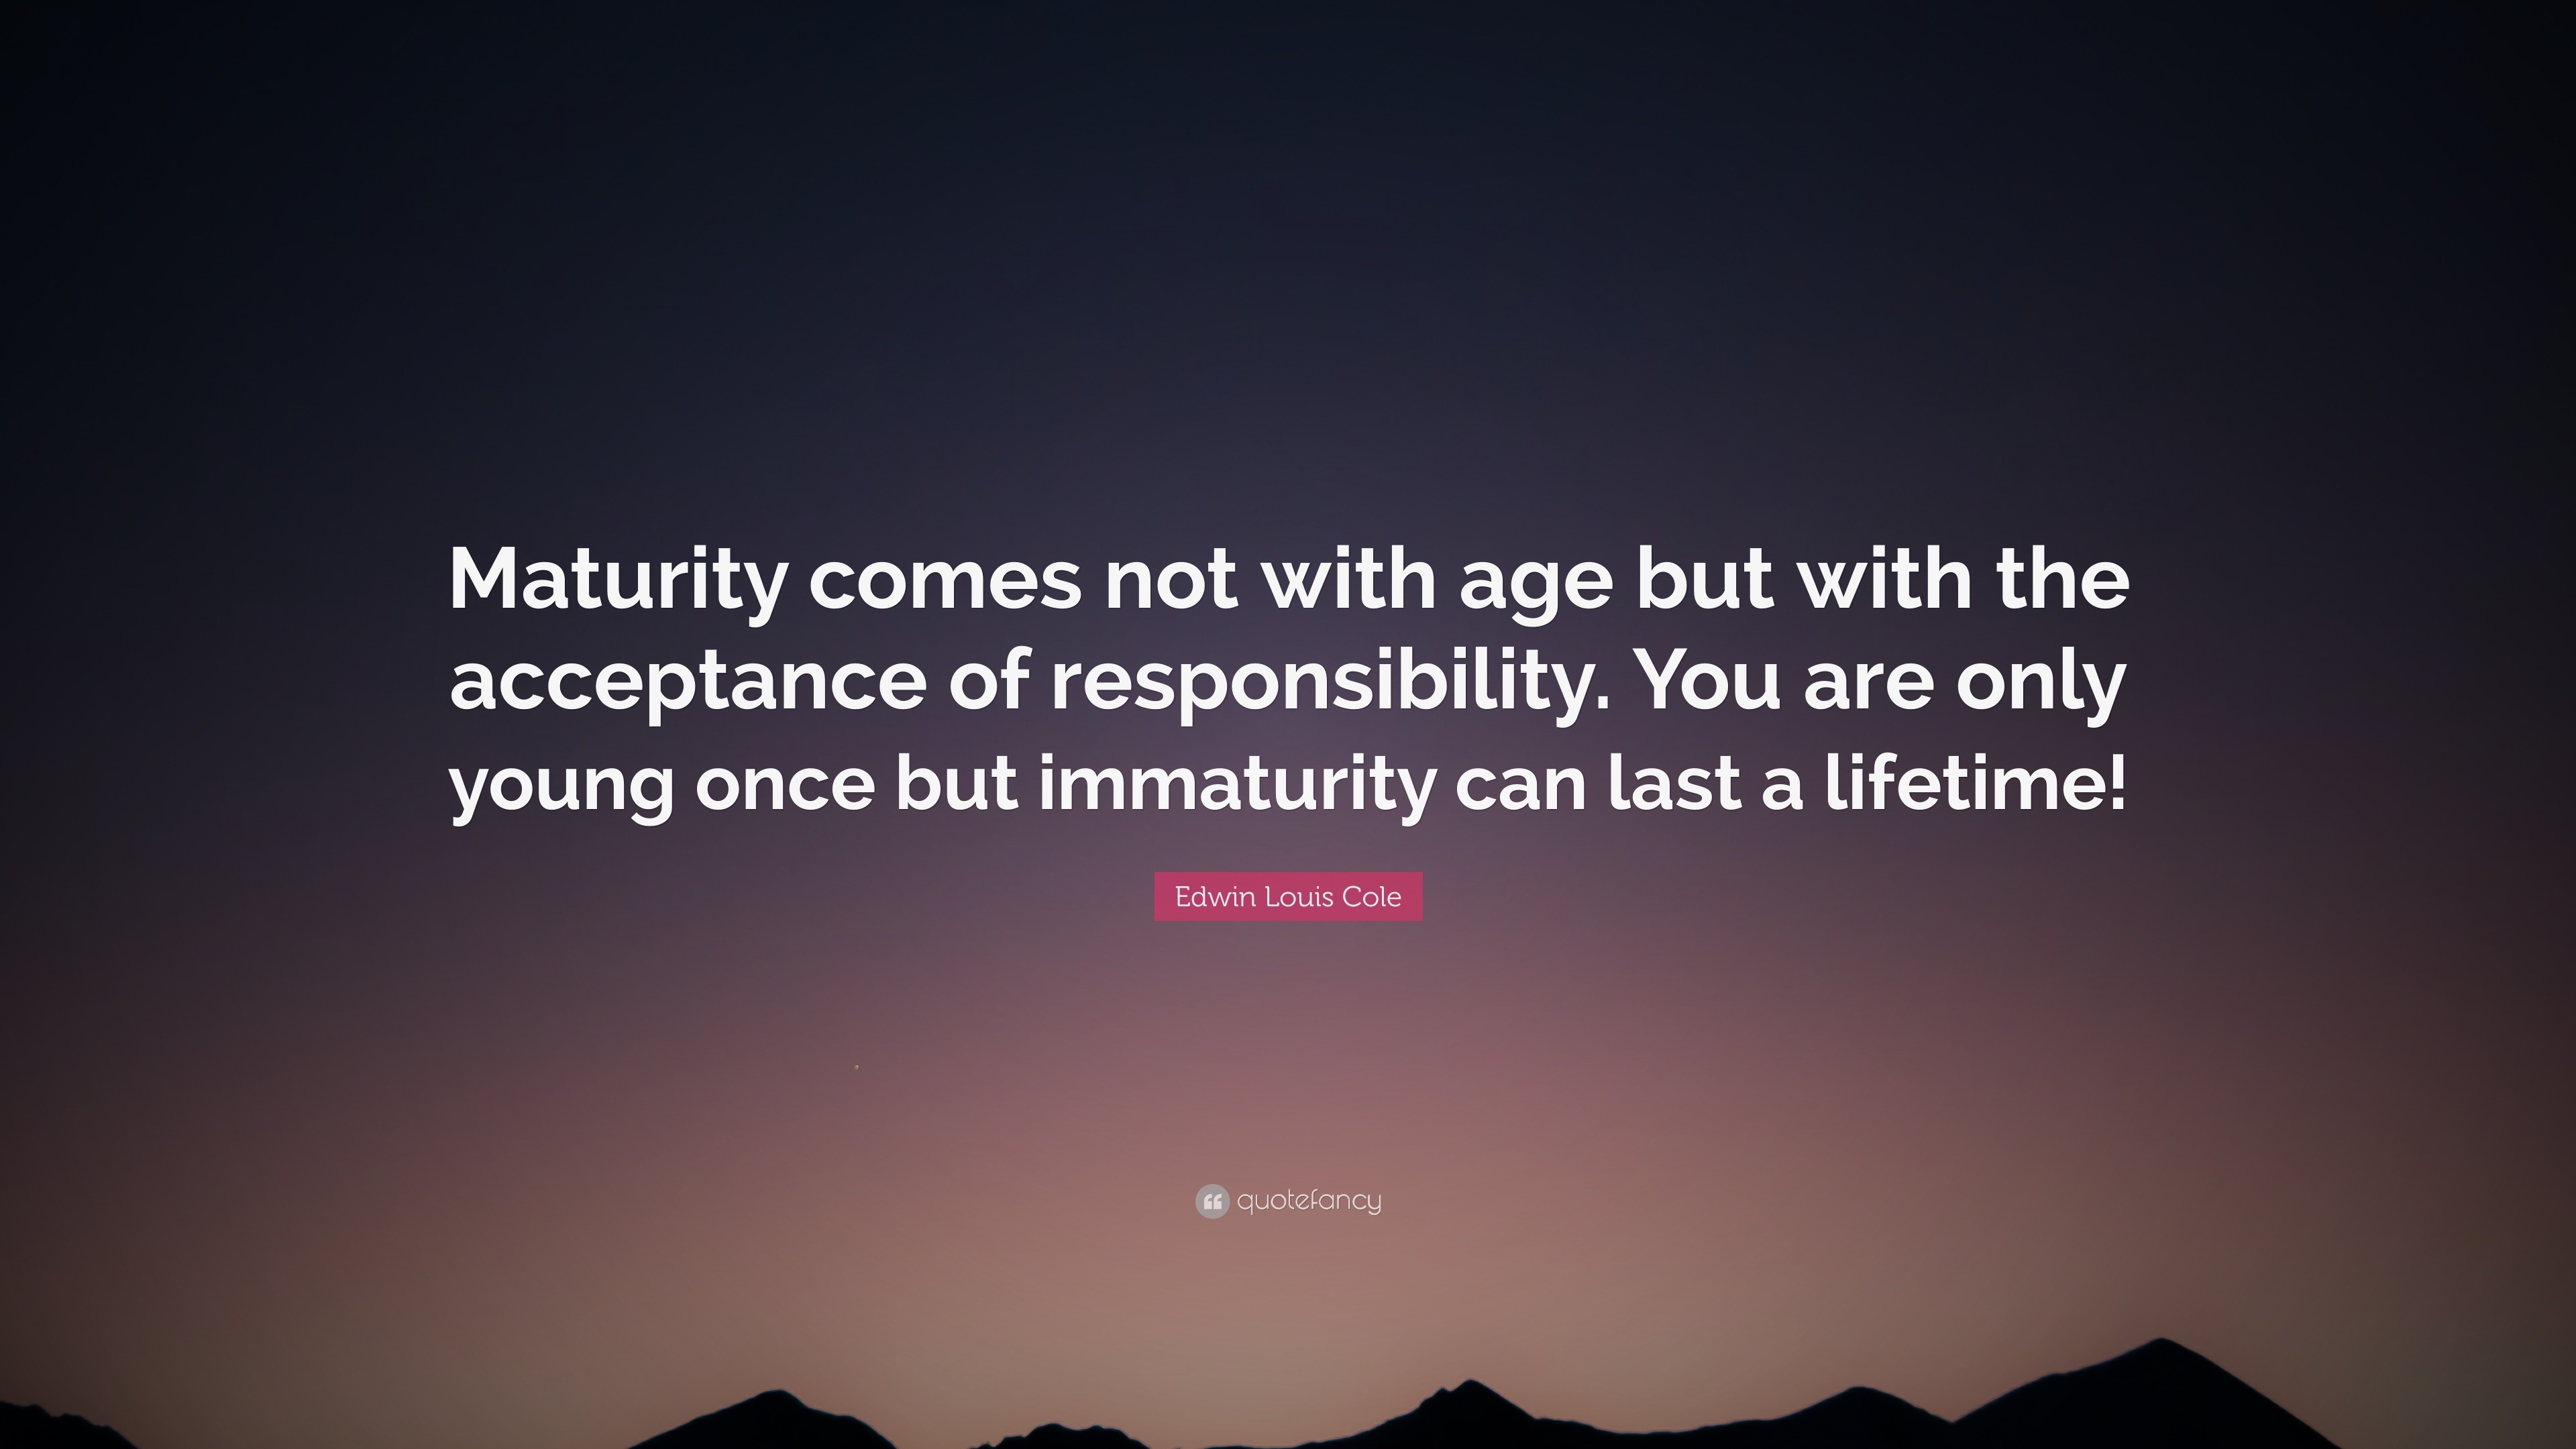 Edwin Louis Cole Quote “Maturity comes not with age but